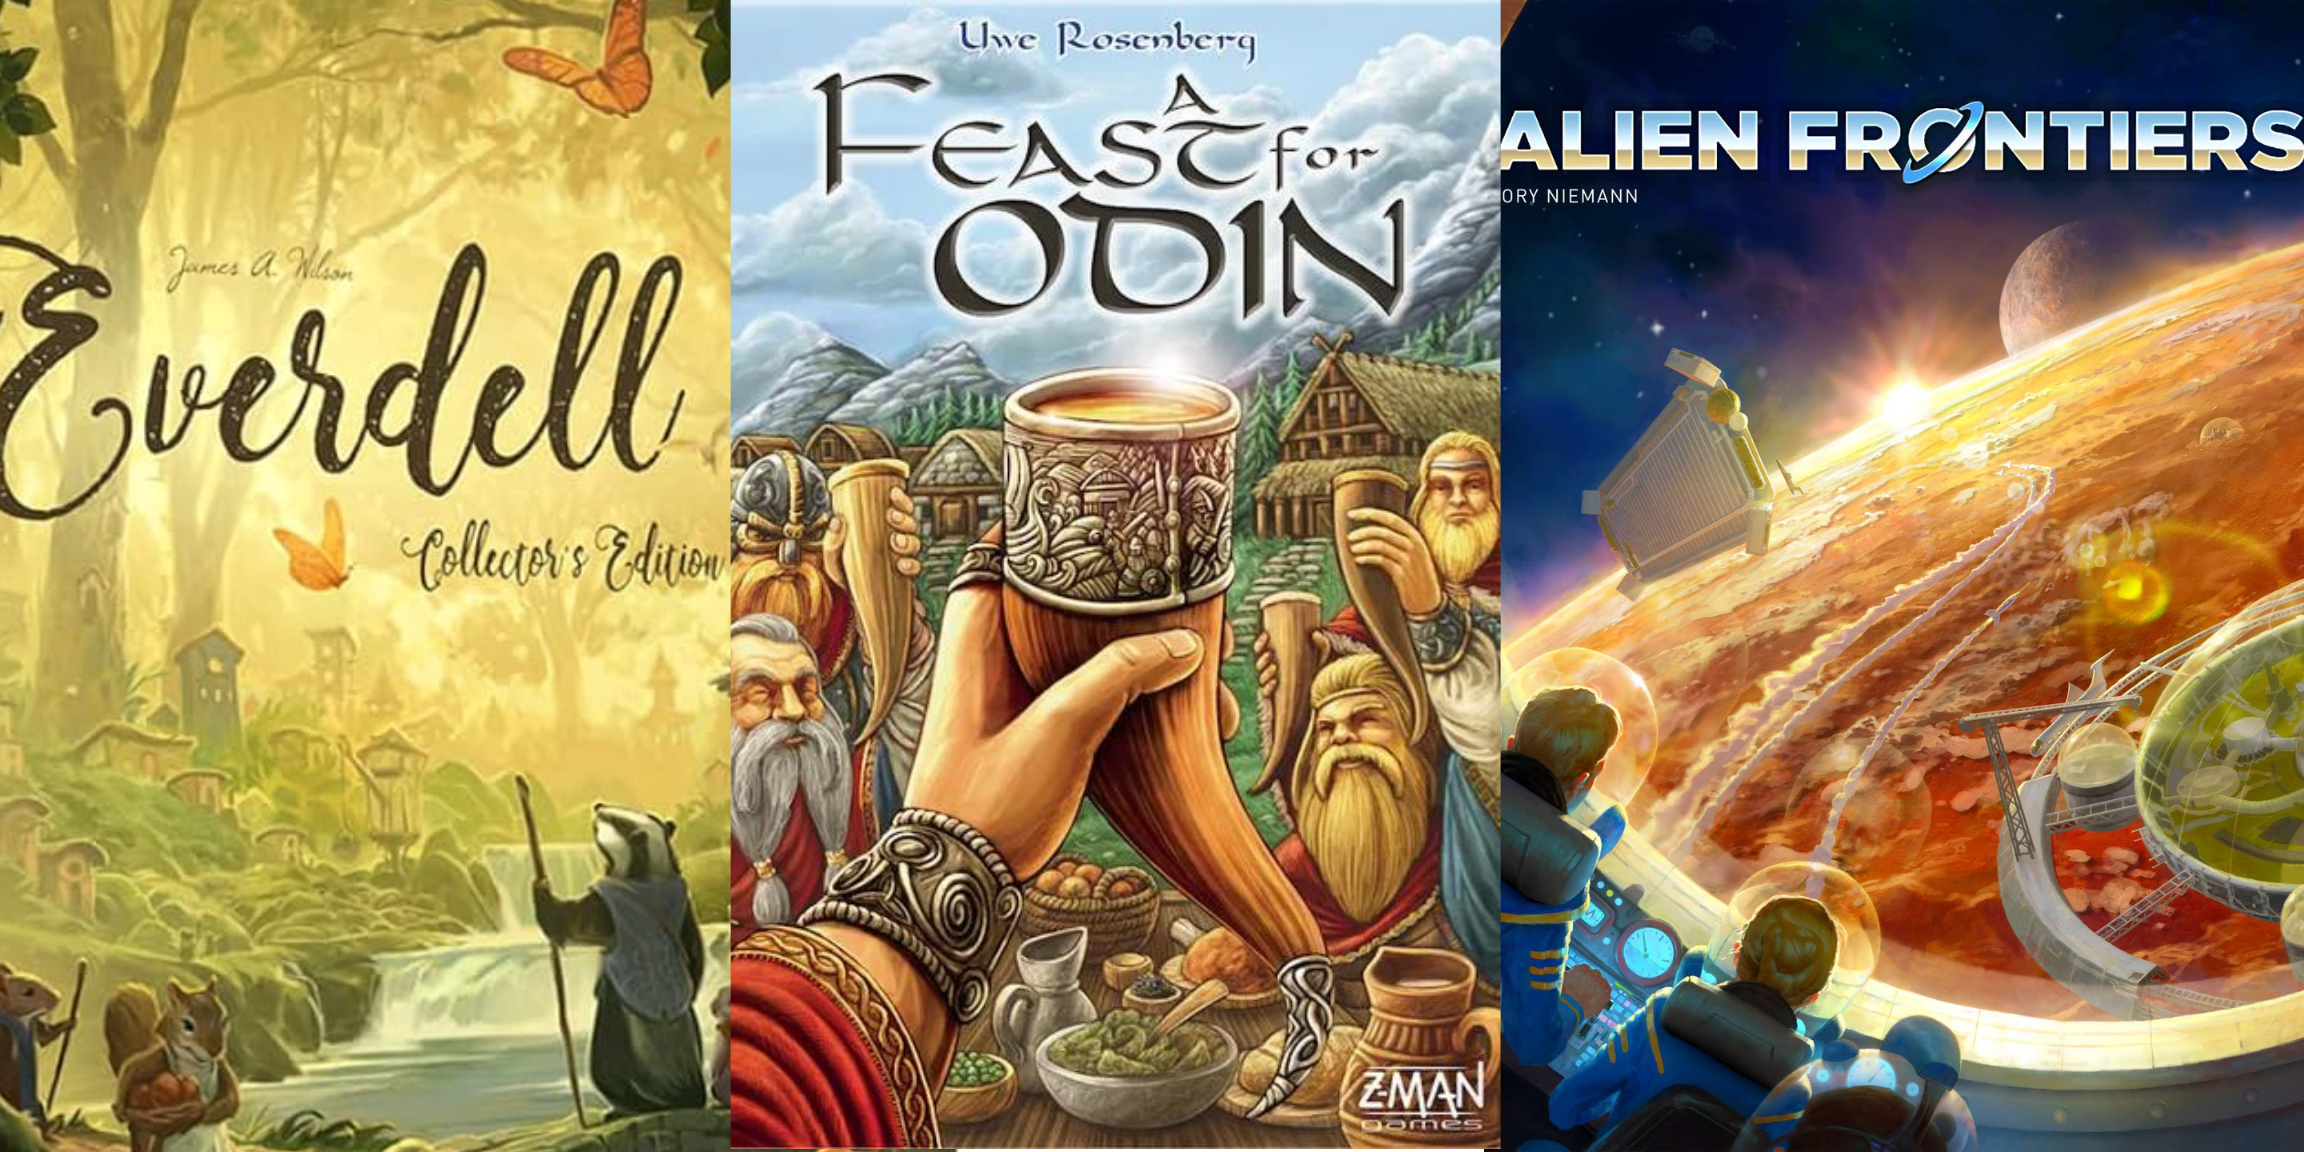 everdell, a feast for odin, and alien frontiers